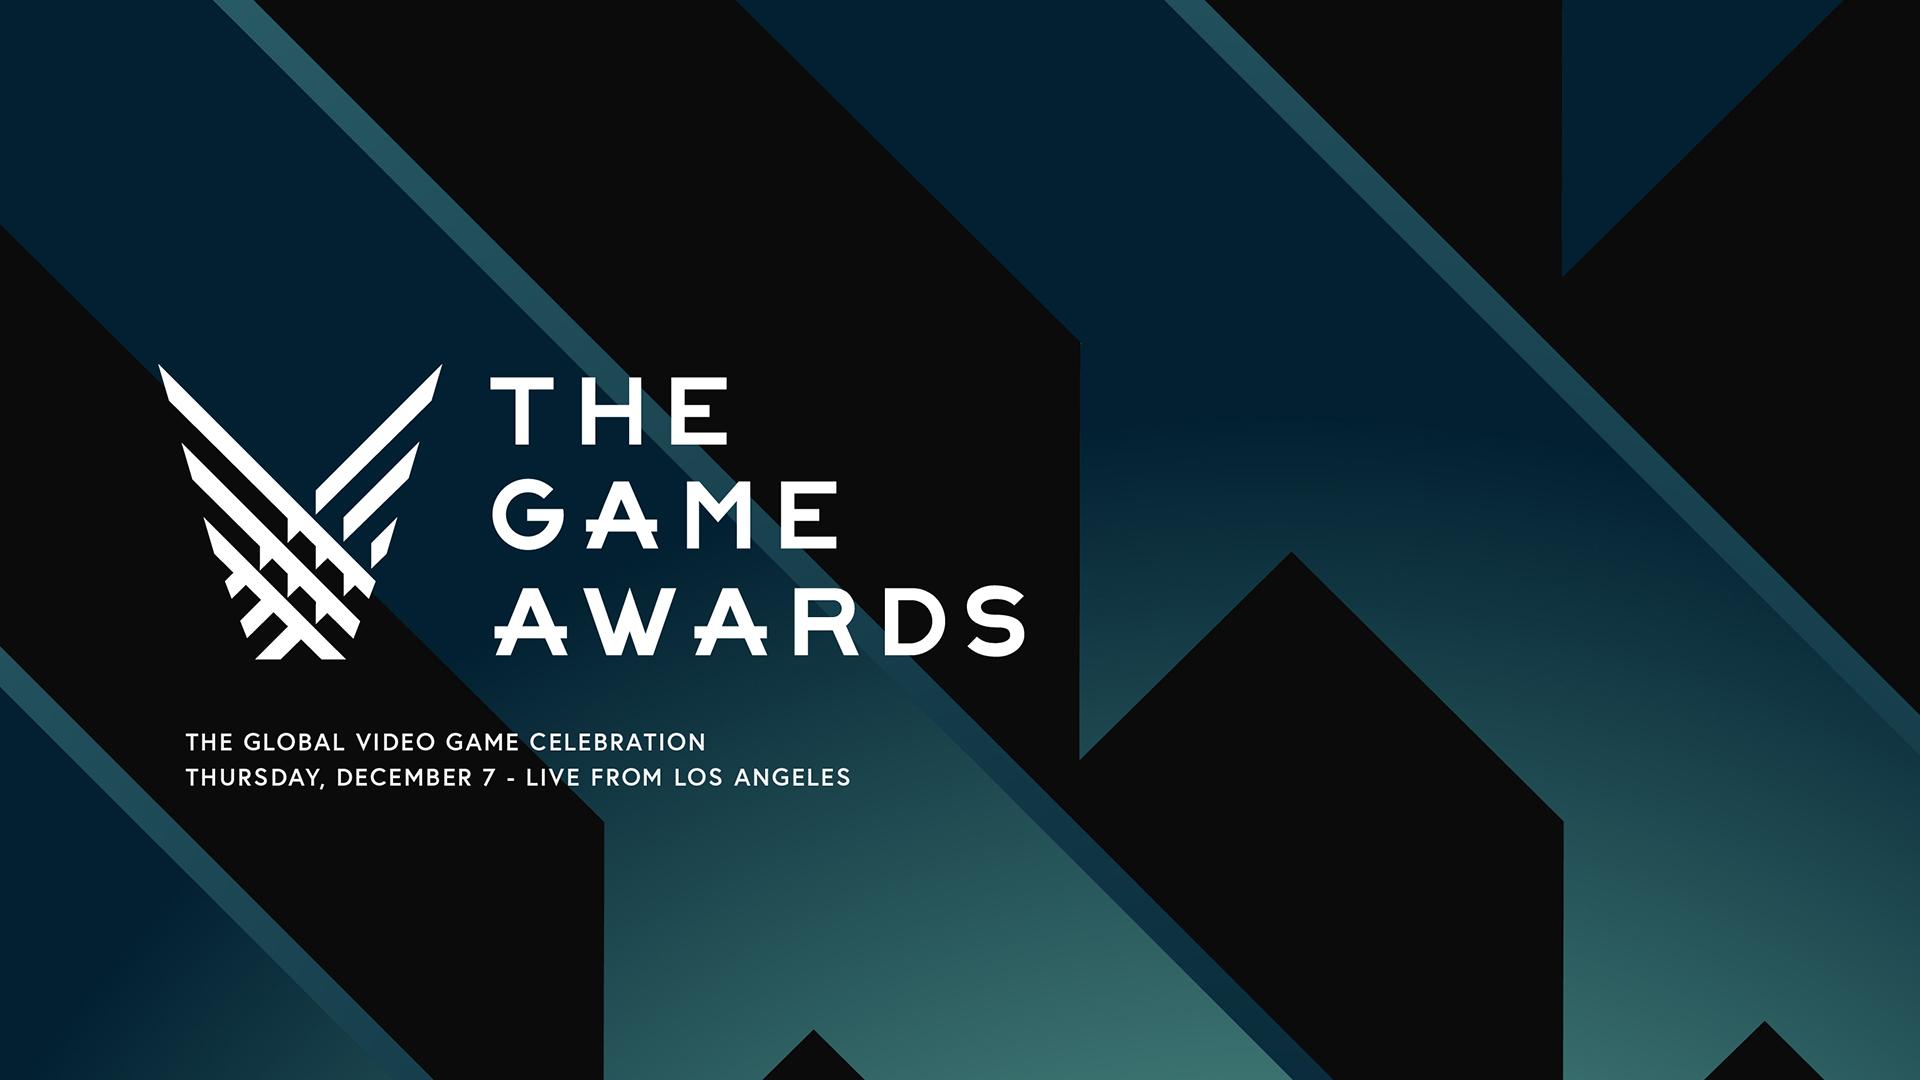 All The Big Games And Announcements At The 2017 Game Awards